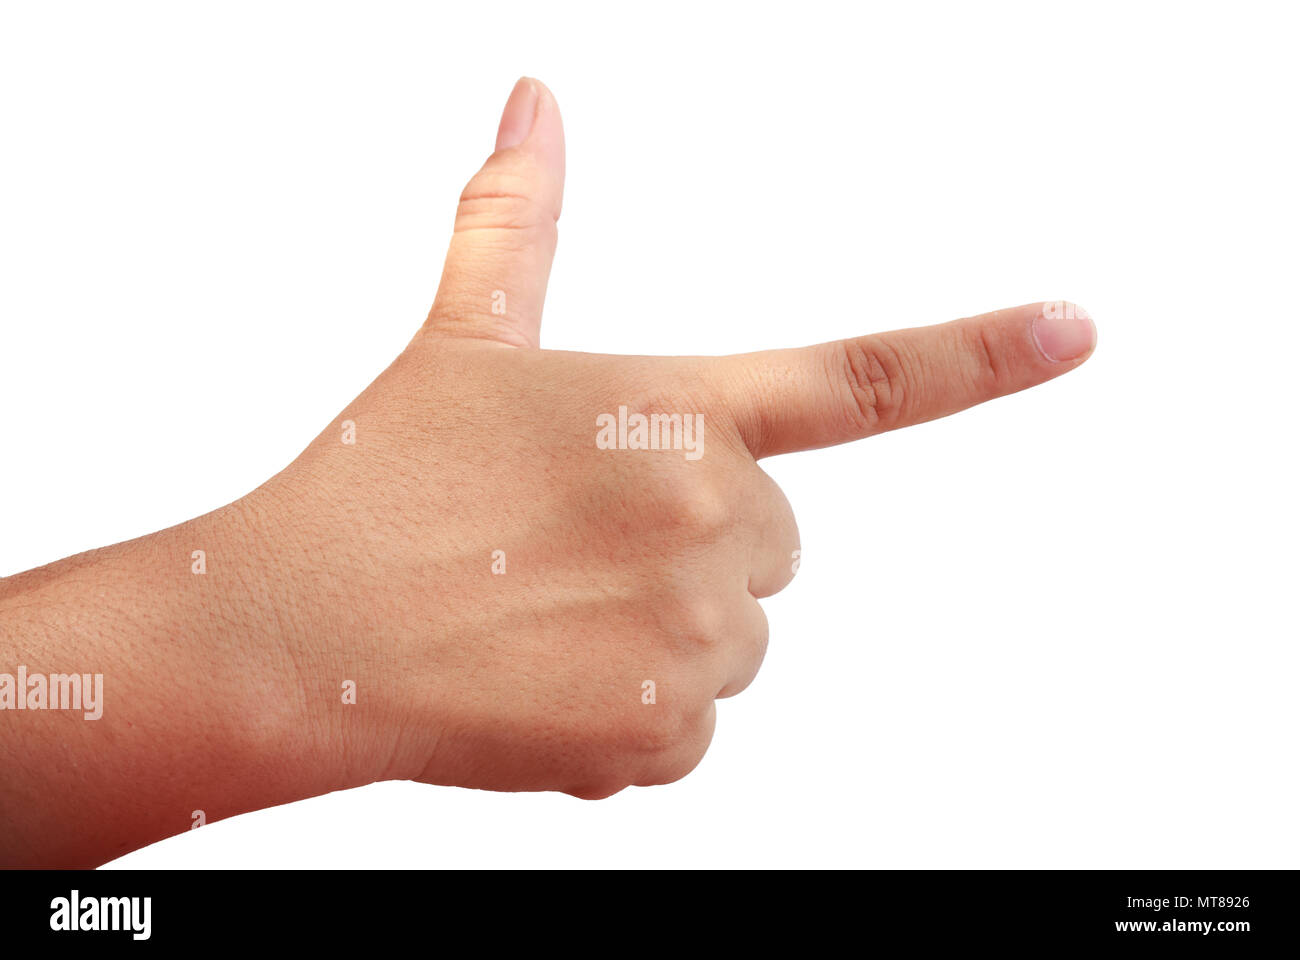 Hand show on white background Stock Photo